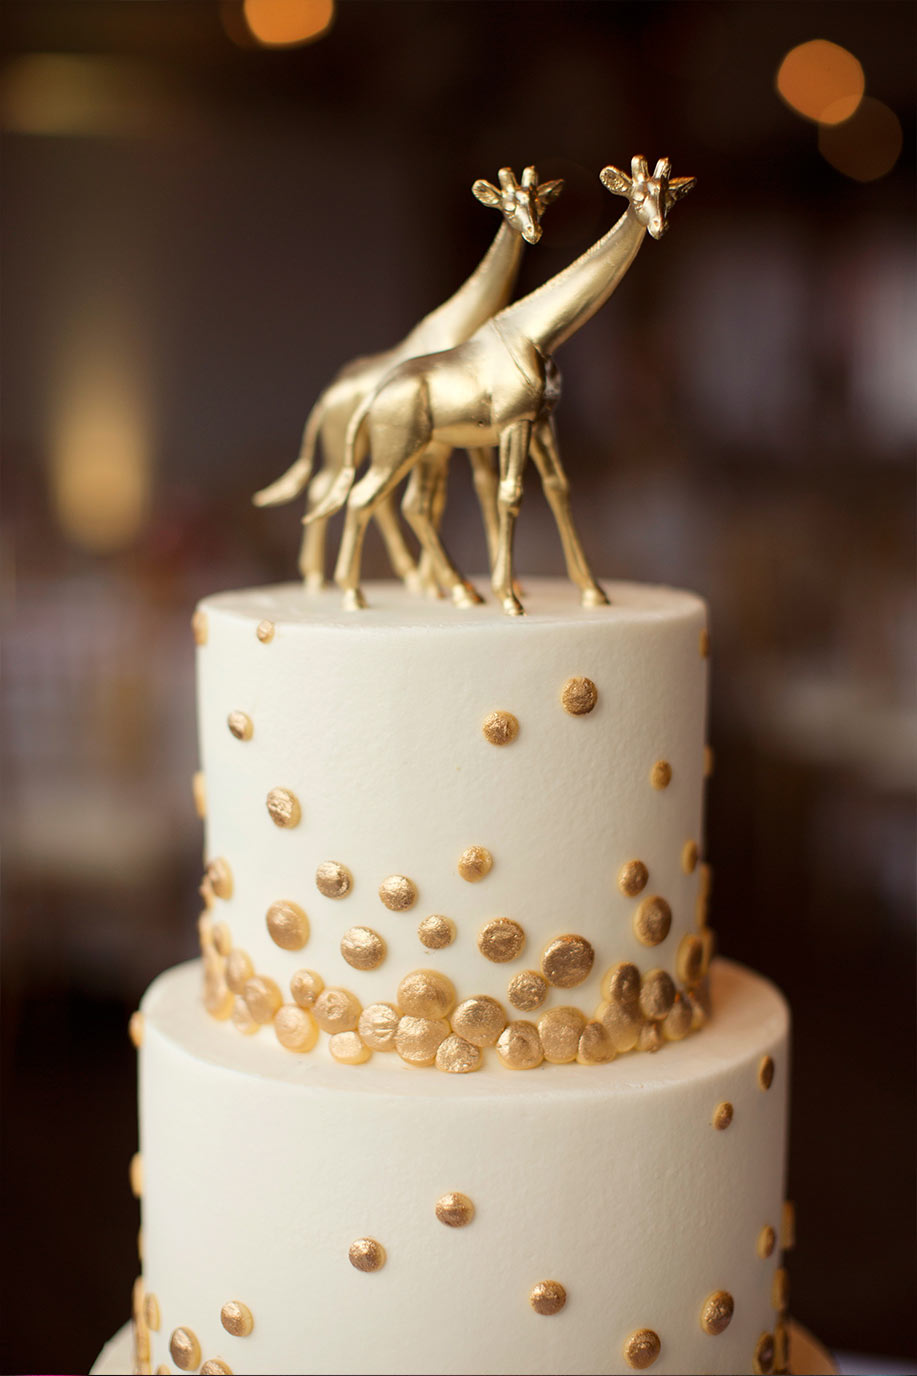 Brides wedding cake with gold polka dots and giraffe topper